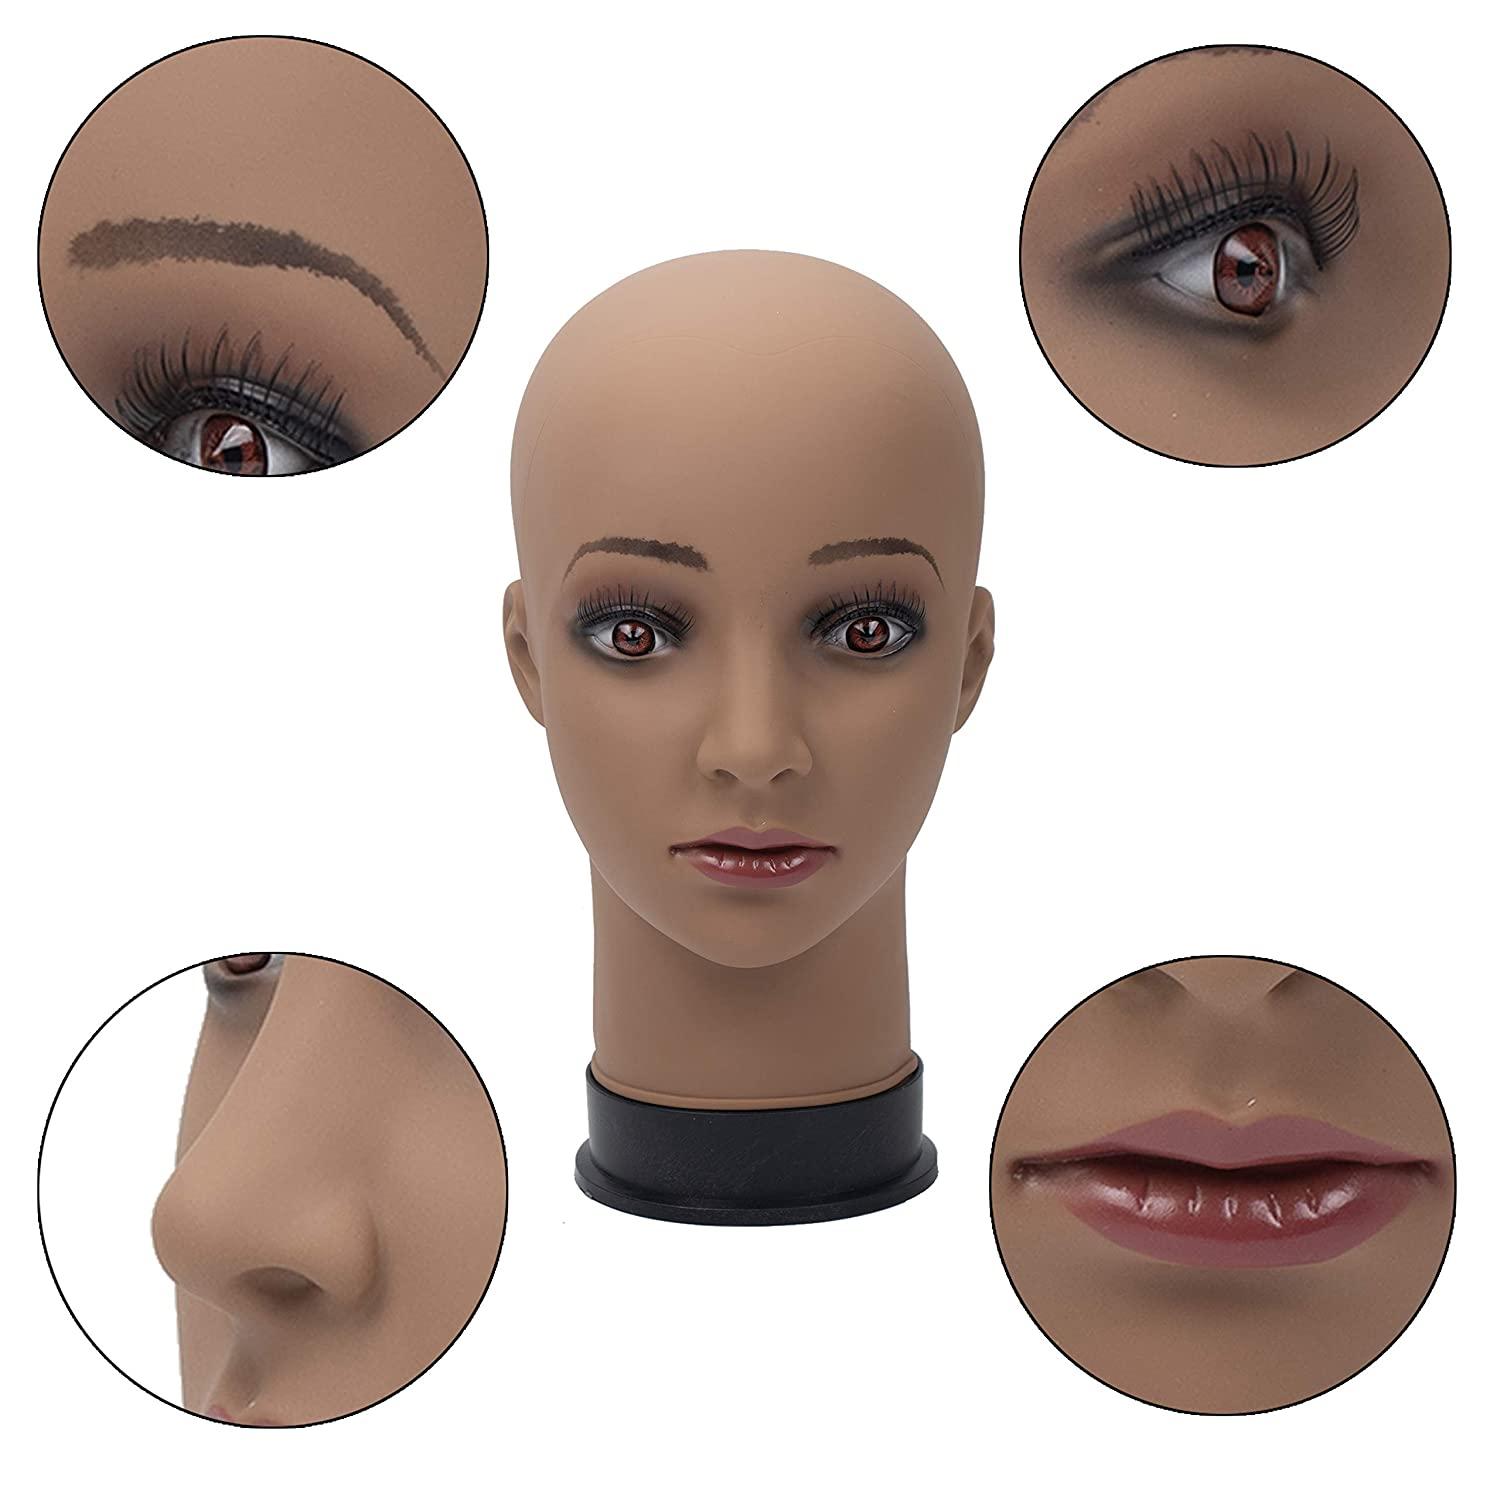 BHD BEAUTY Eyelash Practice Training Head for Makeup Cosmetology Dark Brown  Flat Soft PVC Material Head with Mount Hole.